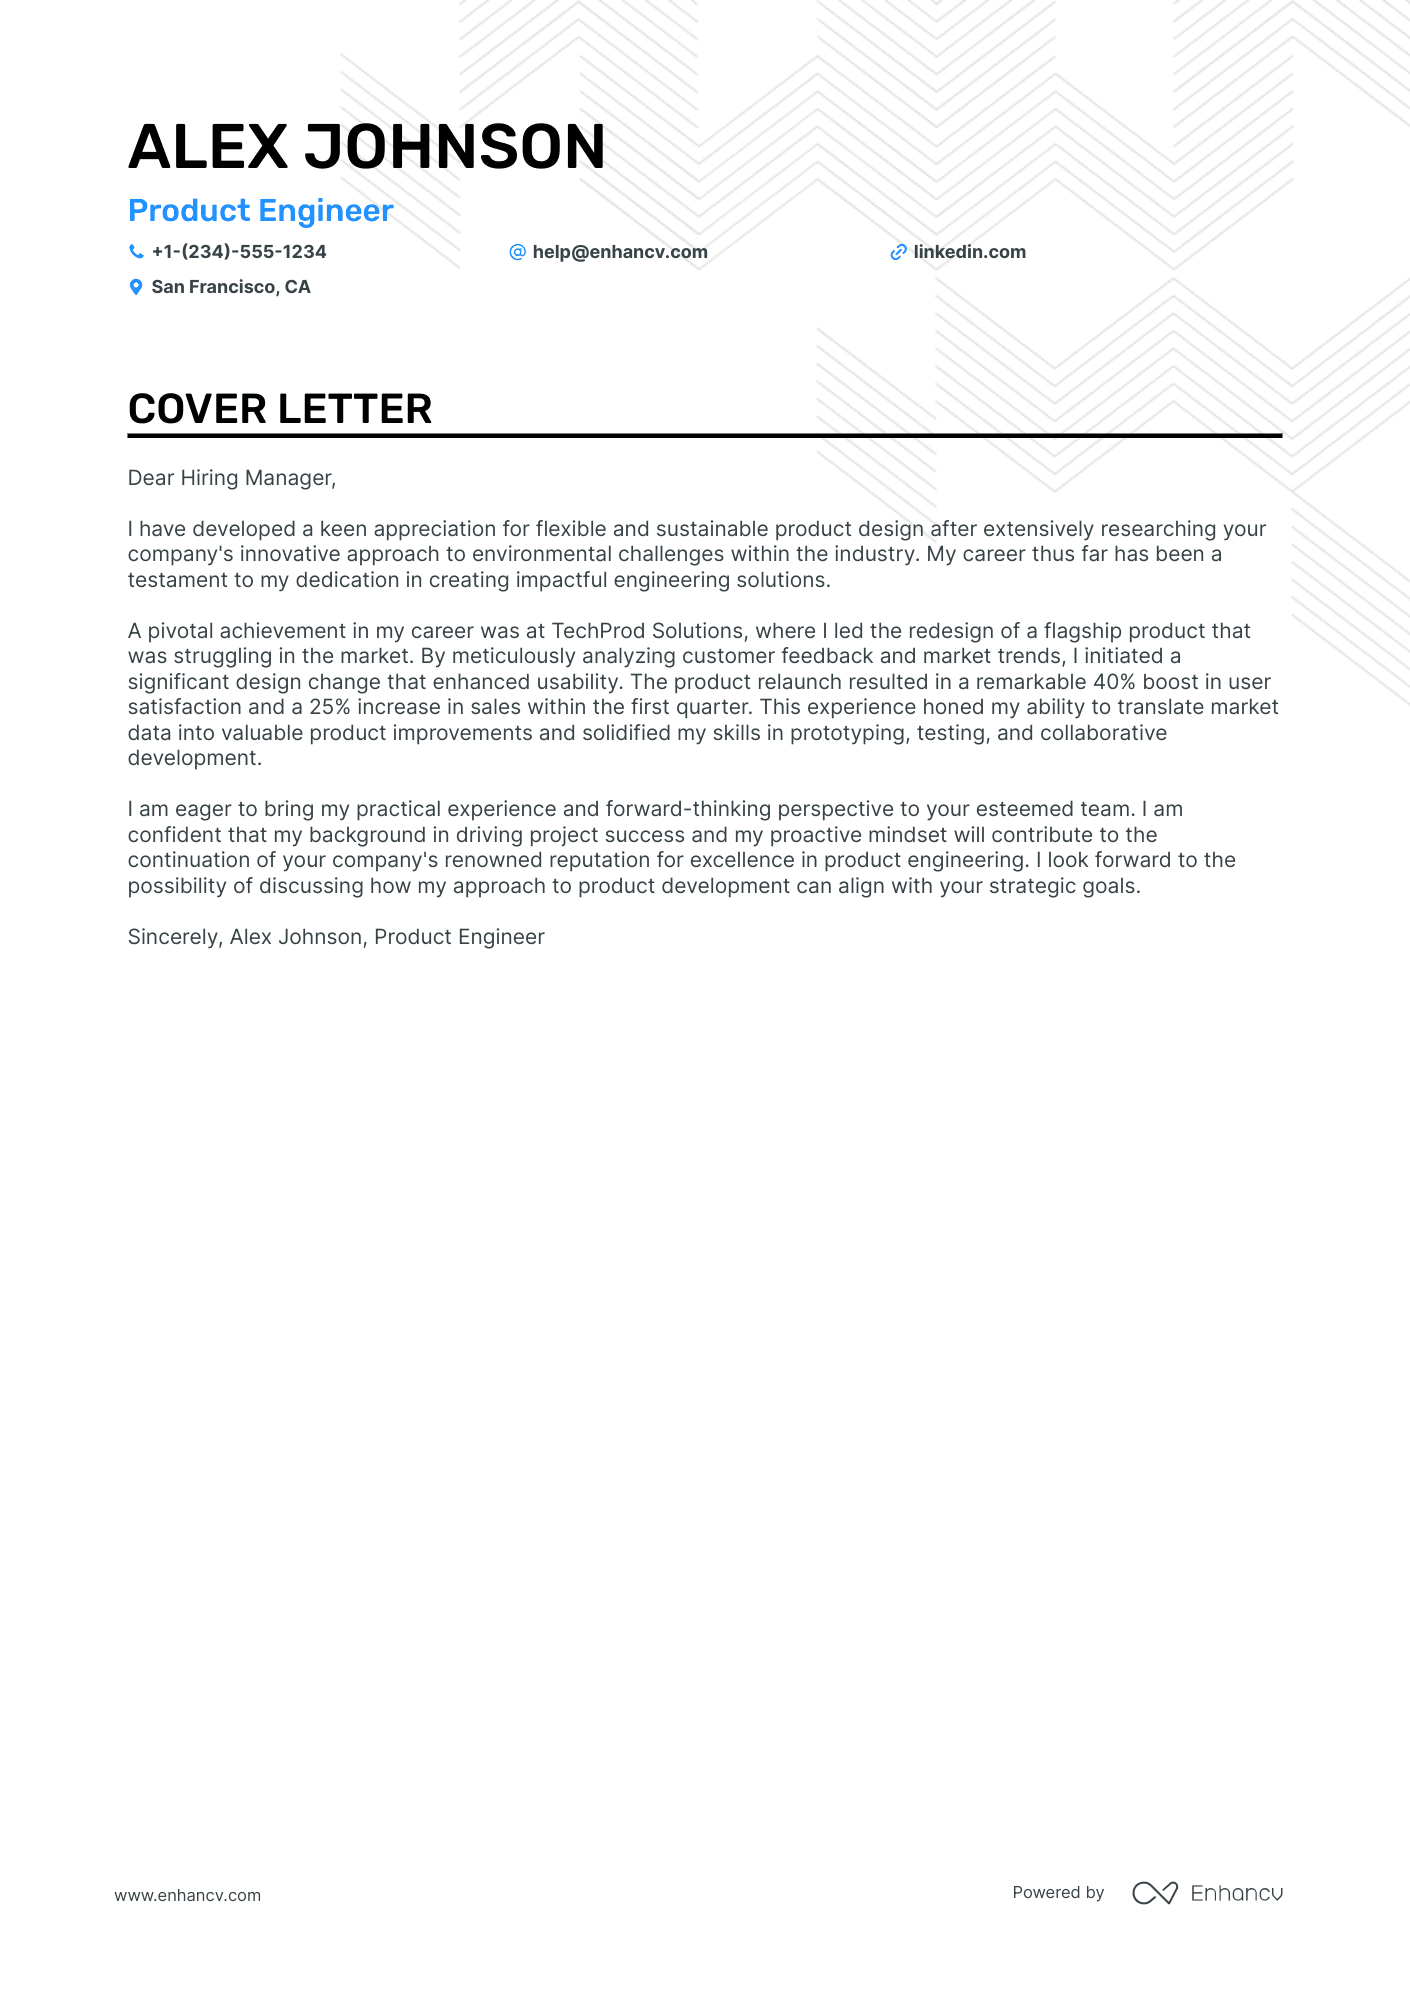 Product Engineer cover letter